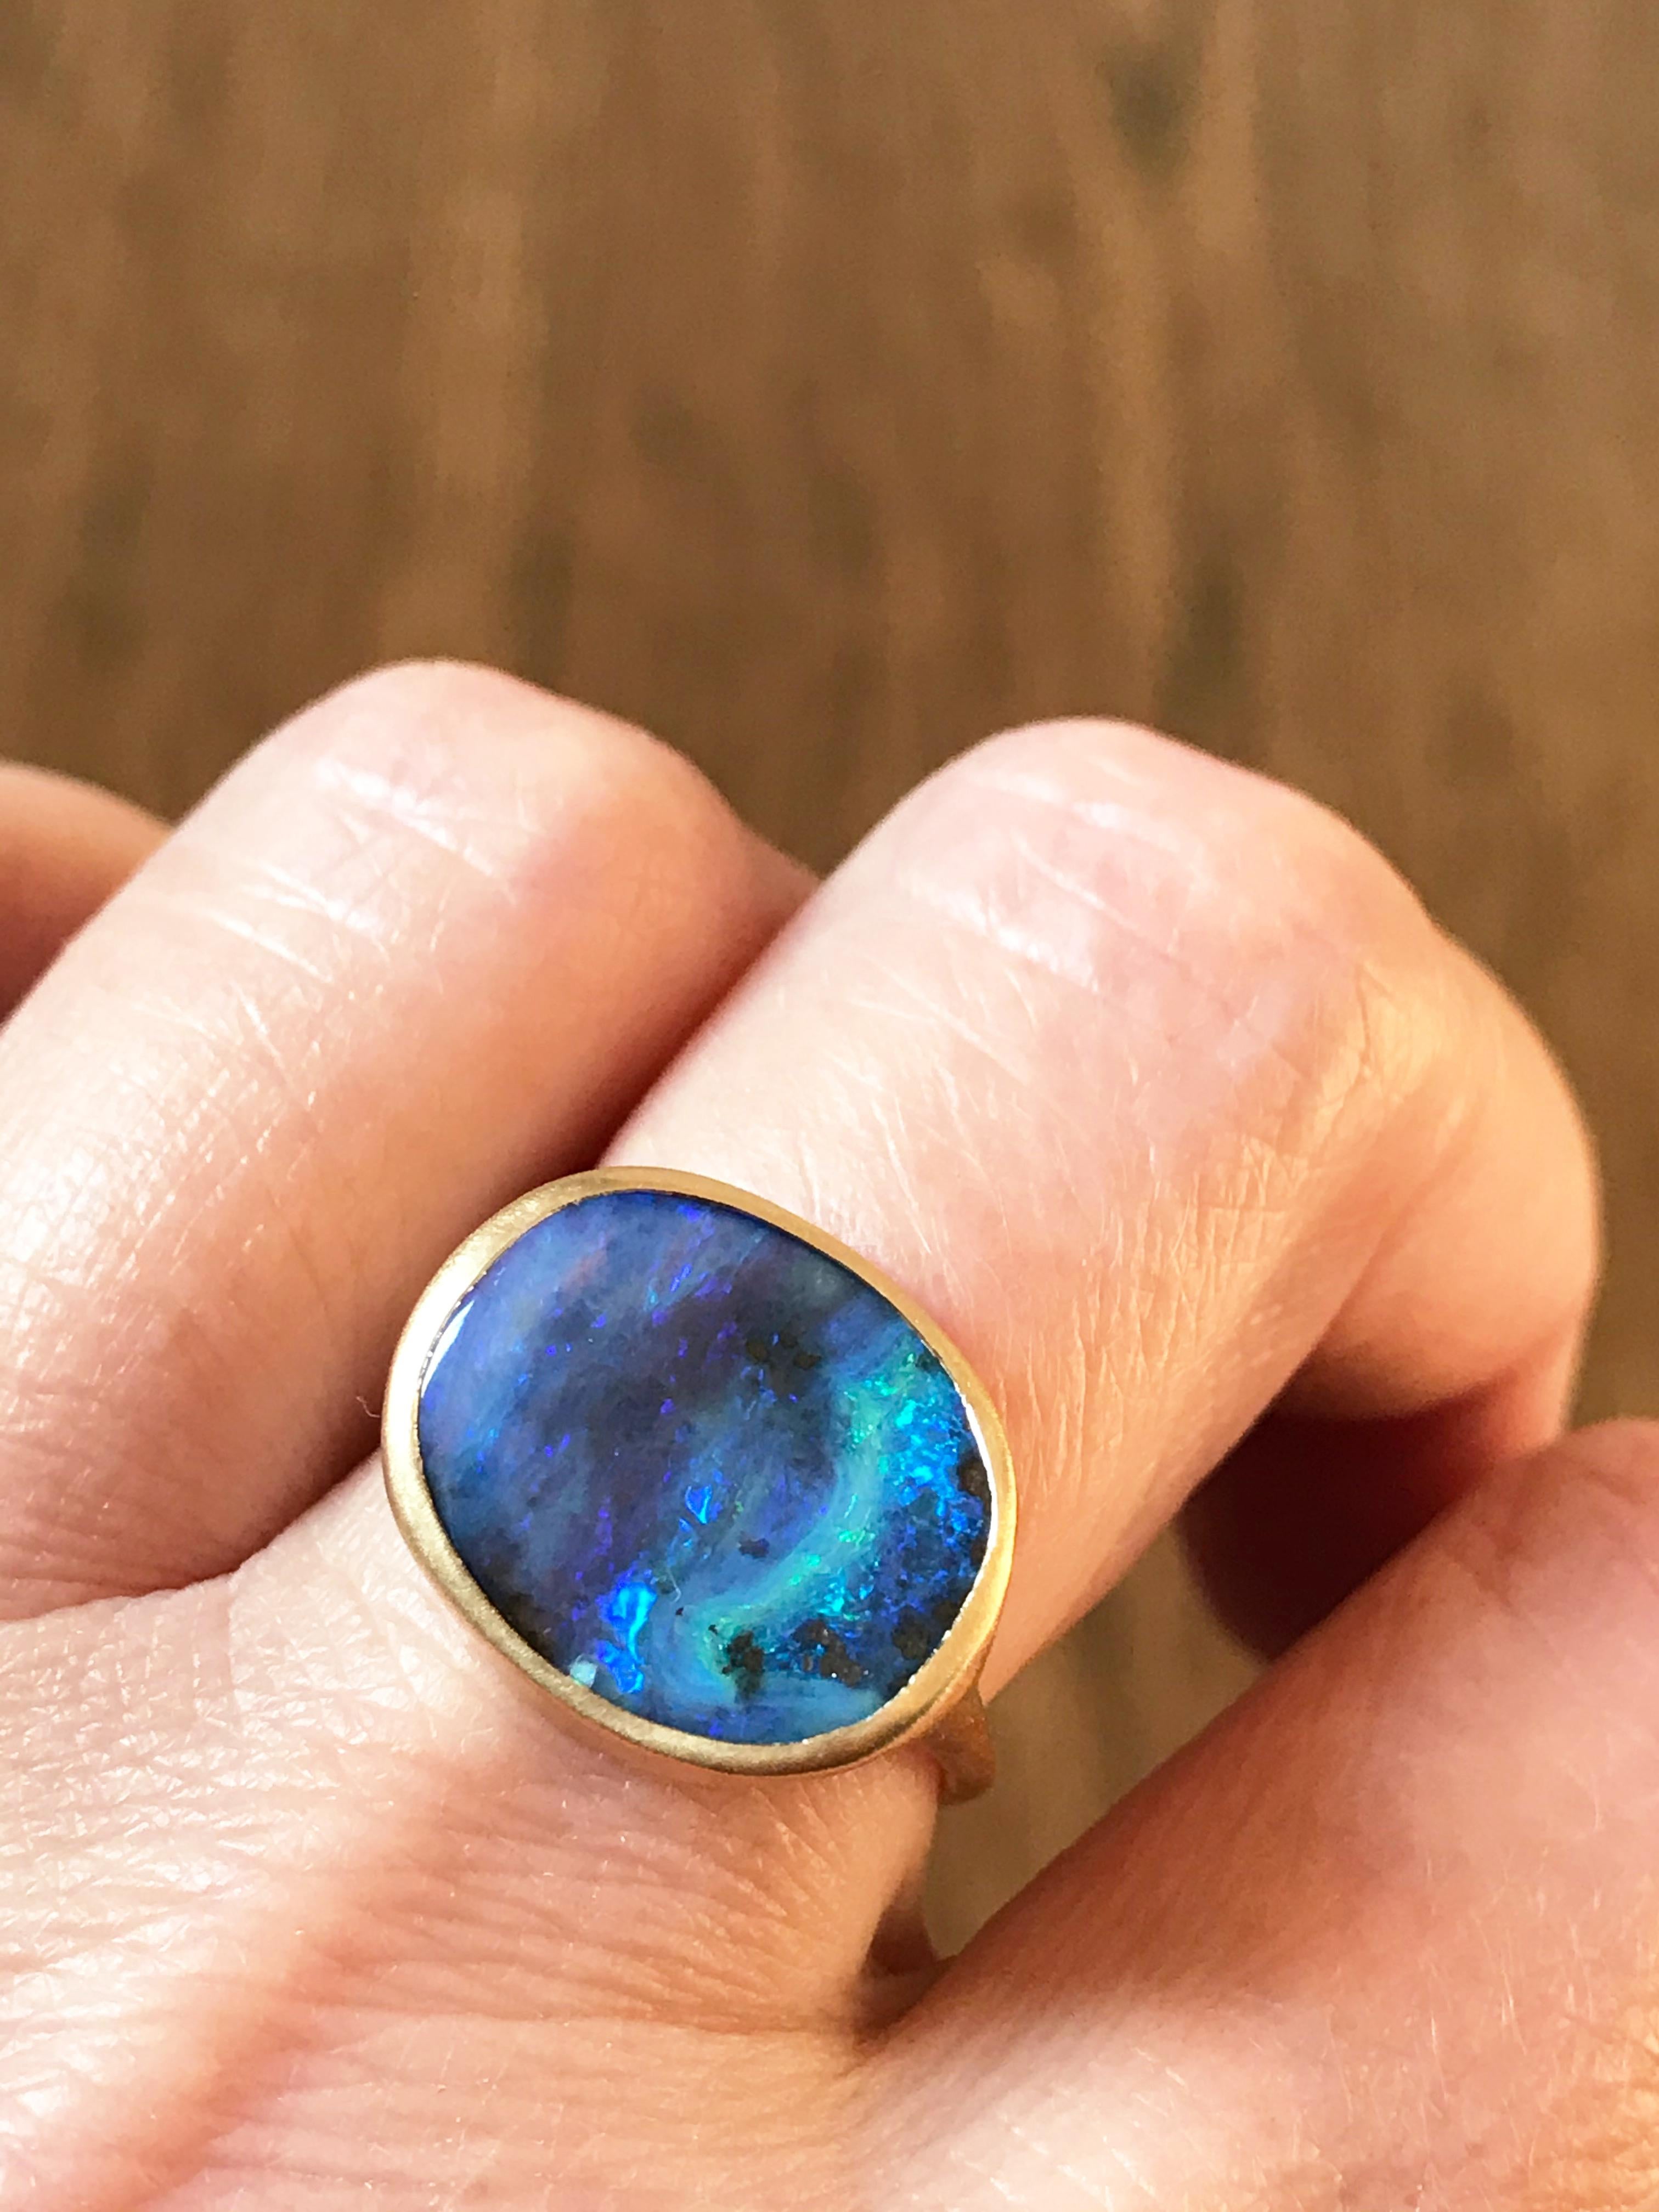 Dalben design One of a kind 18 kt yellow gold satin finish ring with a 5,45 carats bezel-set blue Australian Boulder Opal  .
The Australian Boulder Opal has the deep blue seabed colors
Ring size 6 3/4  - EU 54 re-sizable .  
Bezel setting dimension: